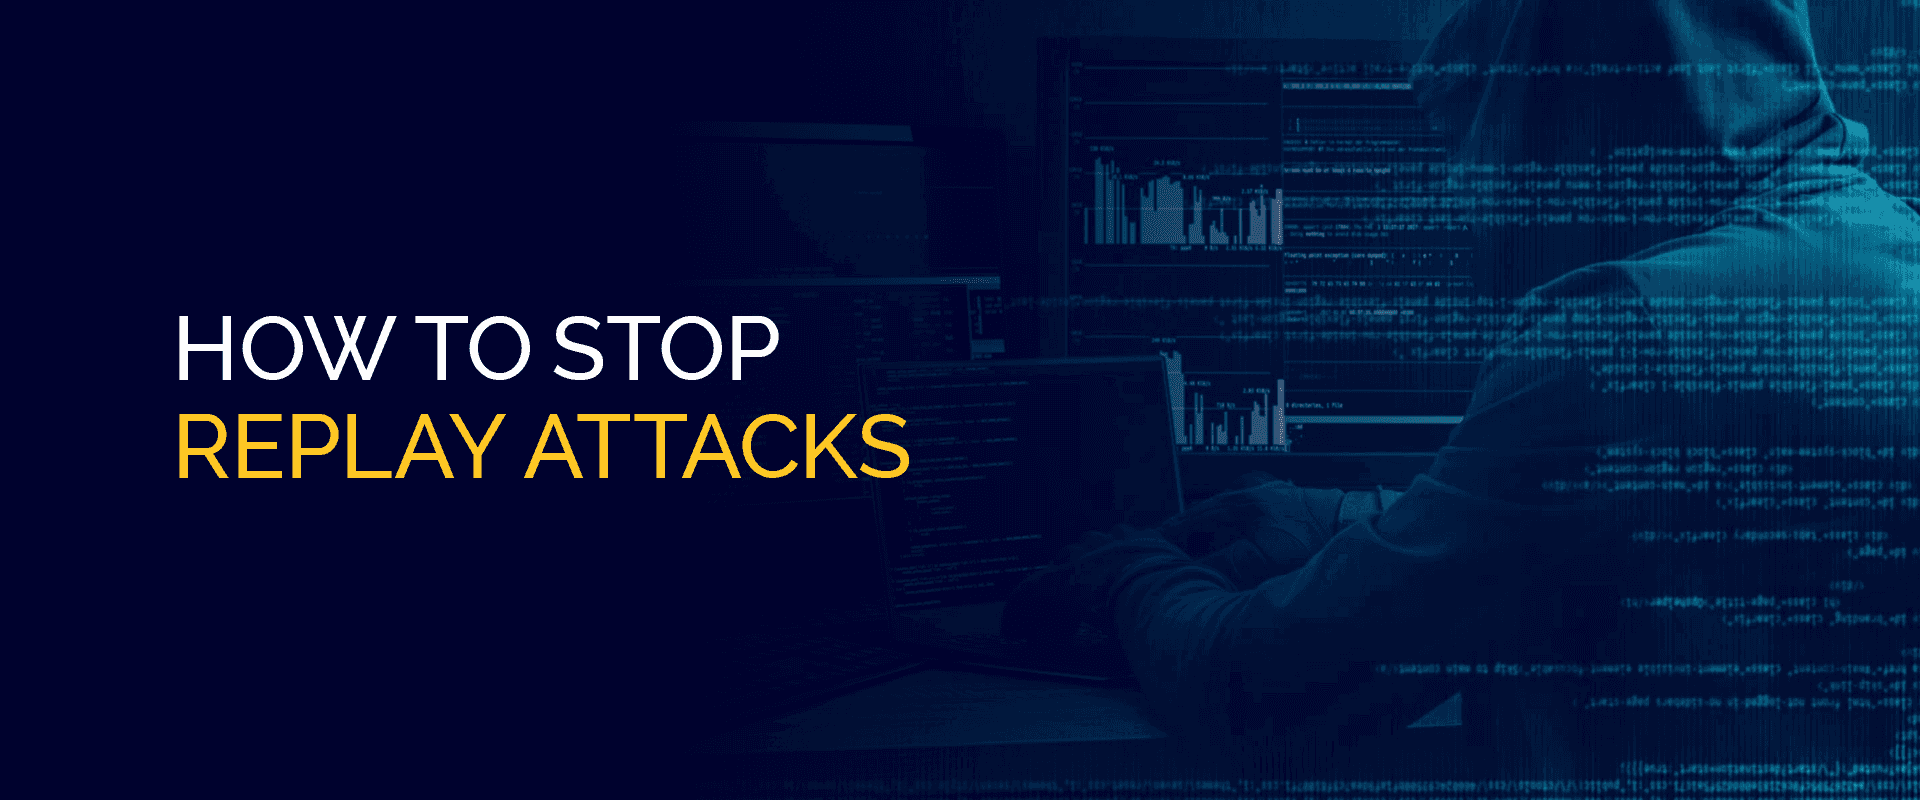 How to Stop Replay Attacks